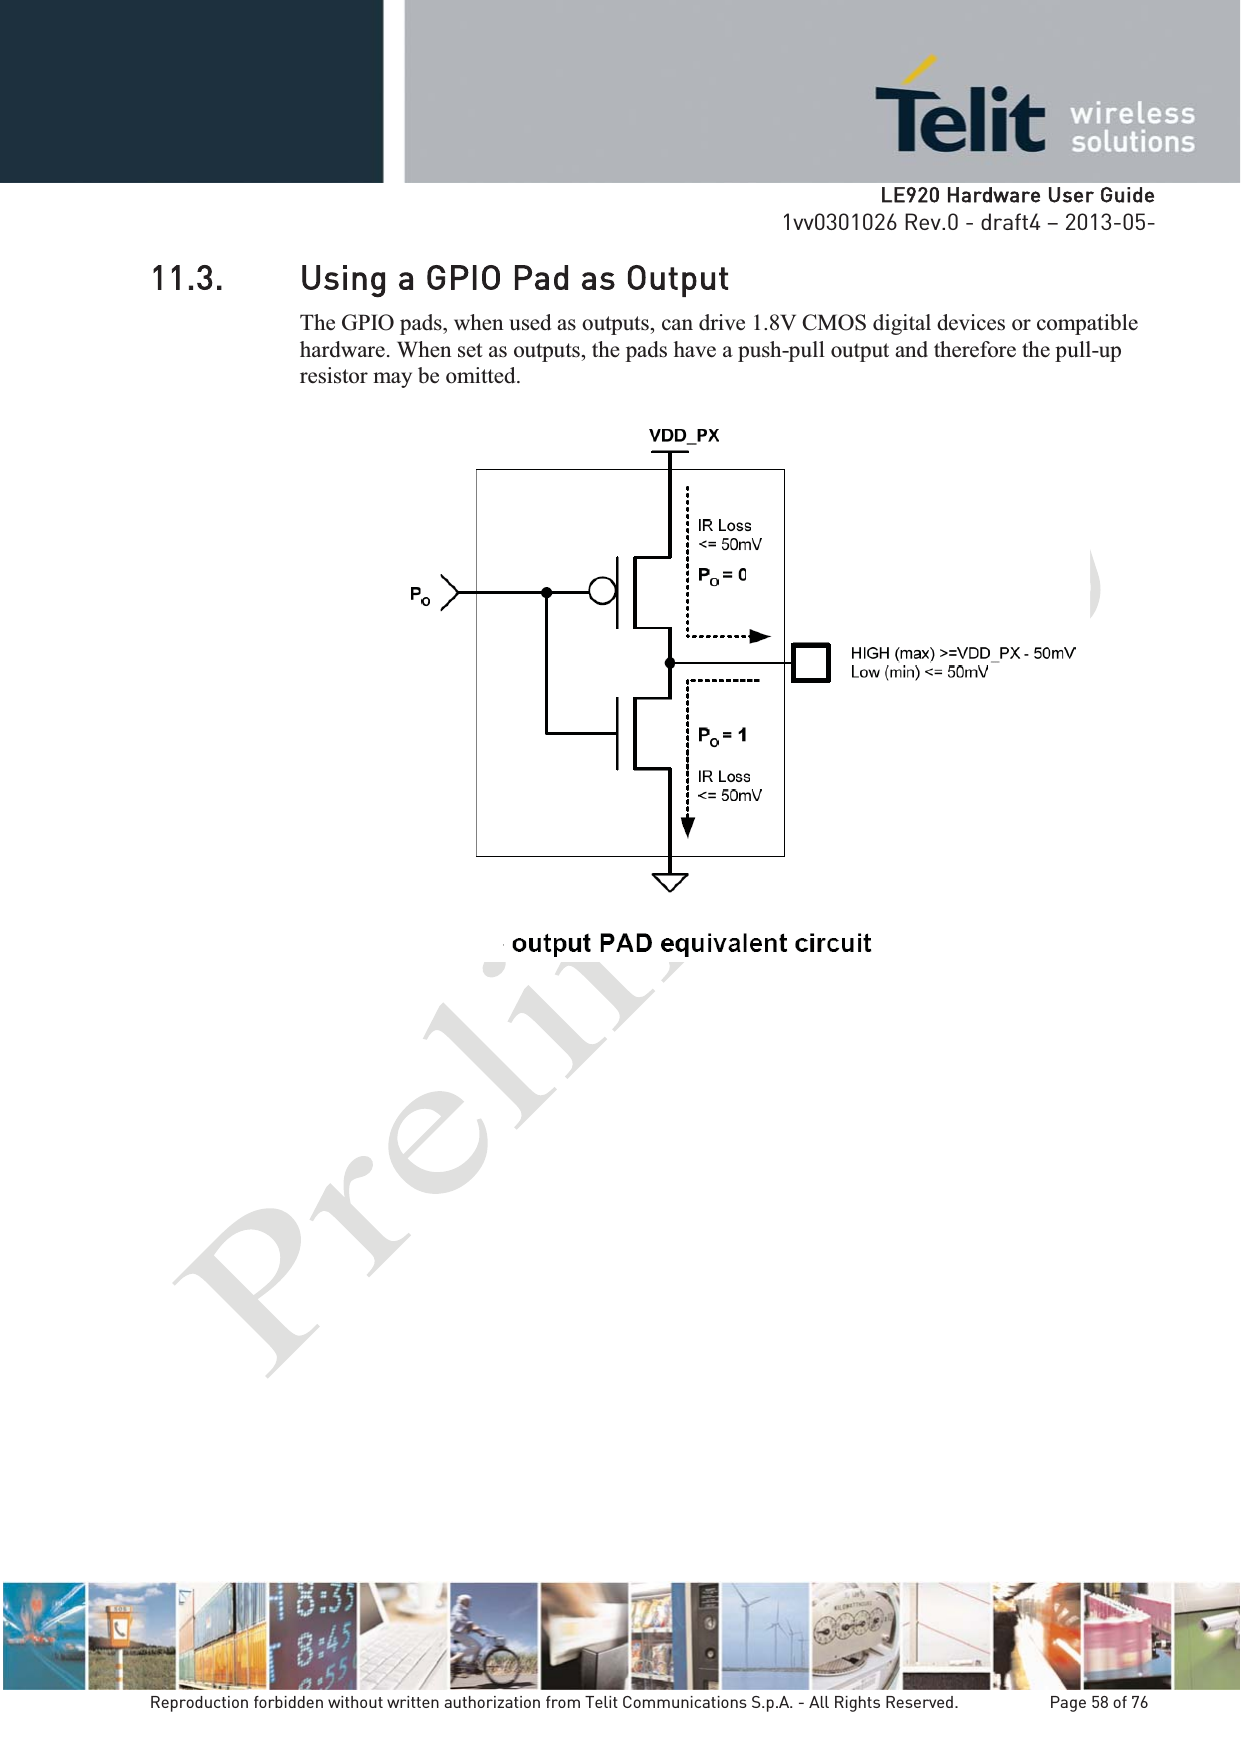   LLE920 Hardware User Guide1vv0301026 Rev.0 - draft4 – 2013-05-Reproduction forbidden without written authorization from Telit Communications S.p.A. - All Rights Reserved.    Page 58 of 76 11.3. Using a GPIO Pad as Output The GPIO pads, when used as outputs, can drive 1.8V CMOS digital devices or compatible hardware. When set as outputs, the pads have a push-pull output and therefore the pull-up resistor may be omitted.    